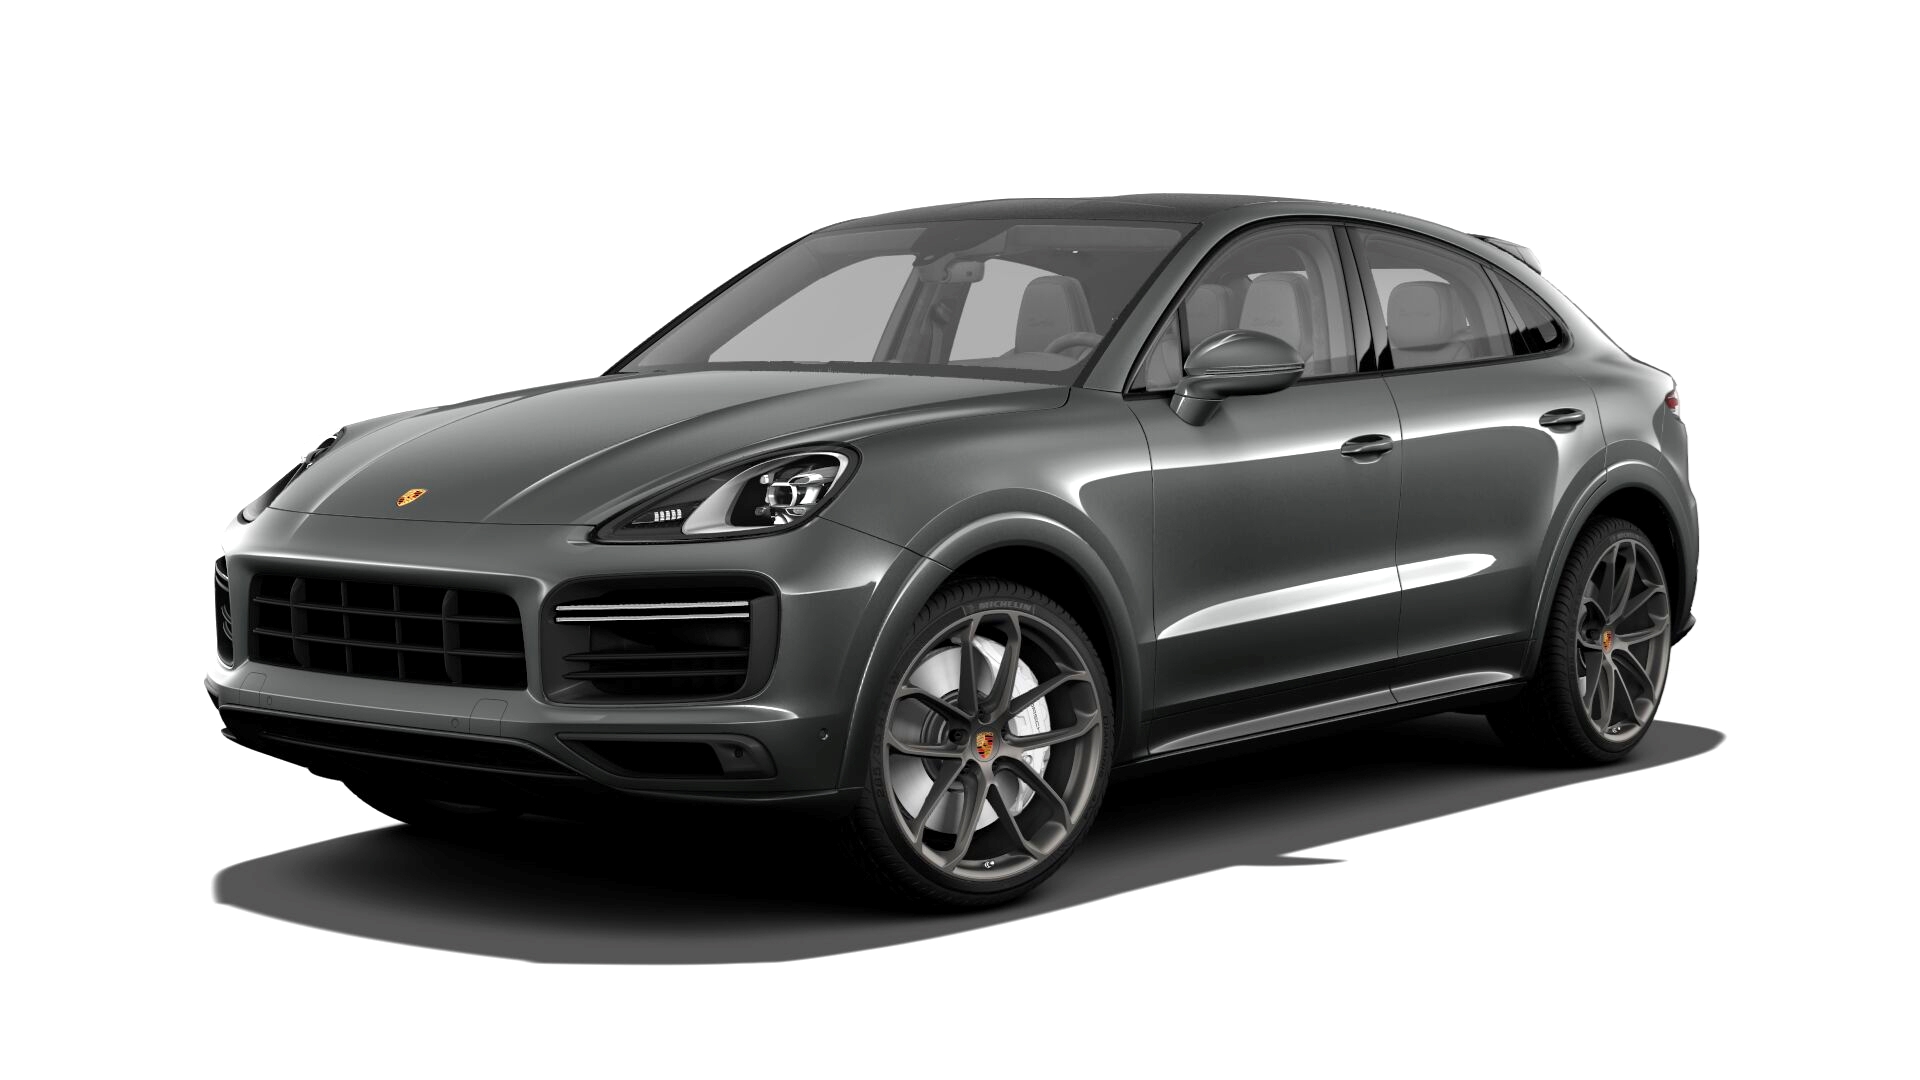 2021 Porsche Cayenne Turbo Coupe Full Specs, Features and